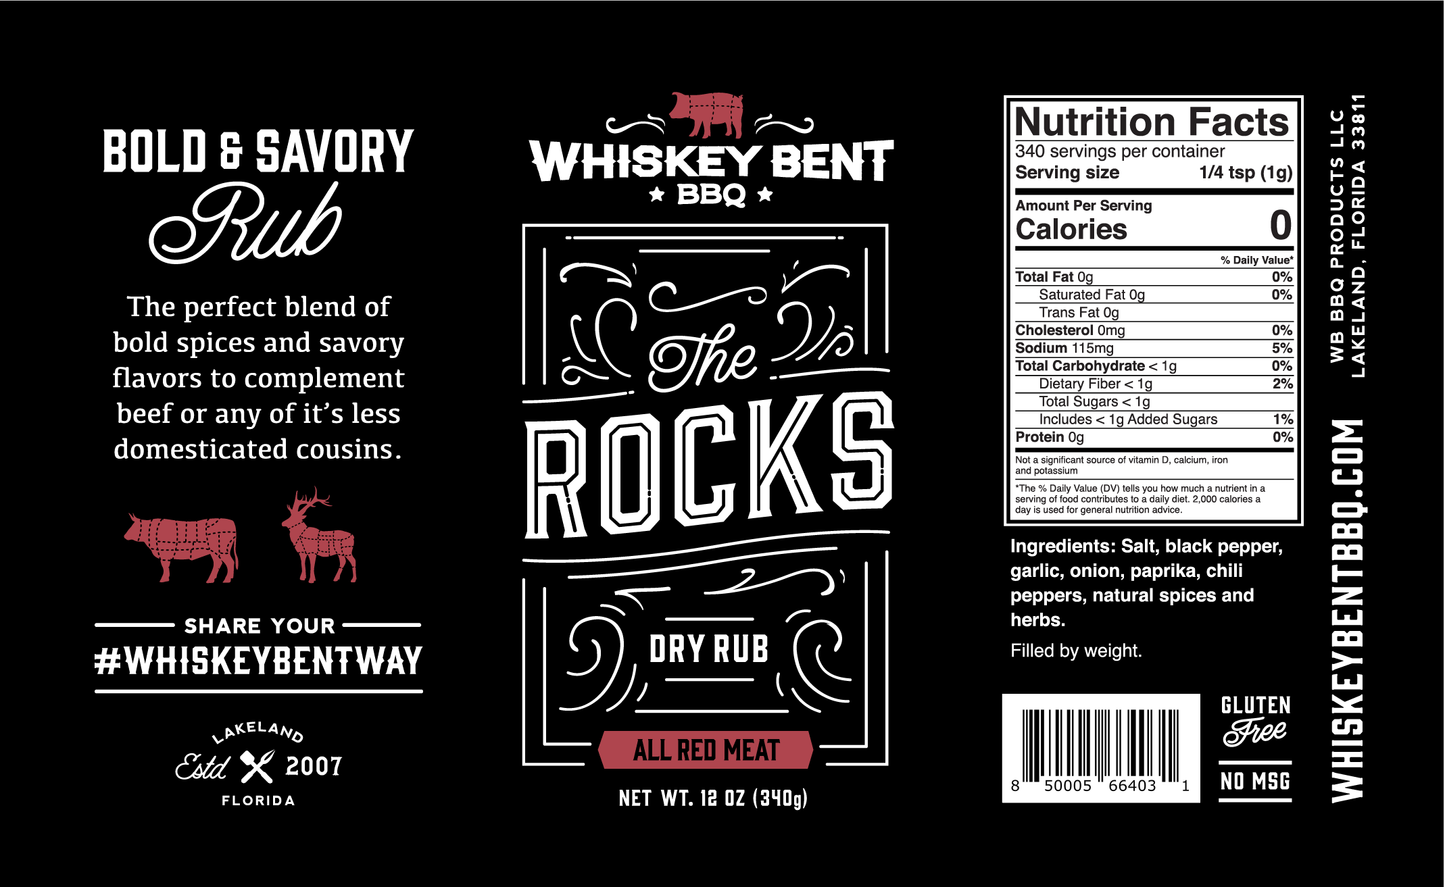 Whiskey Bent BBQ - The Rocks - All Red Meat